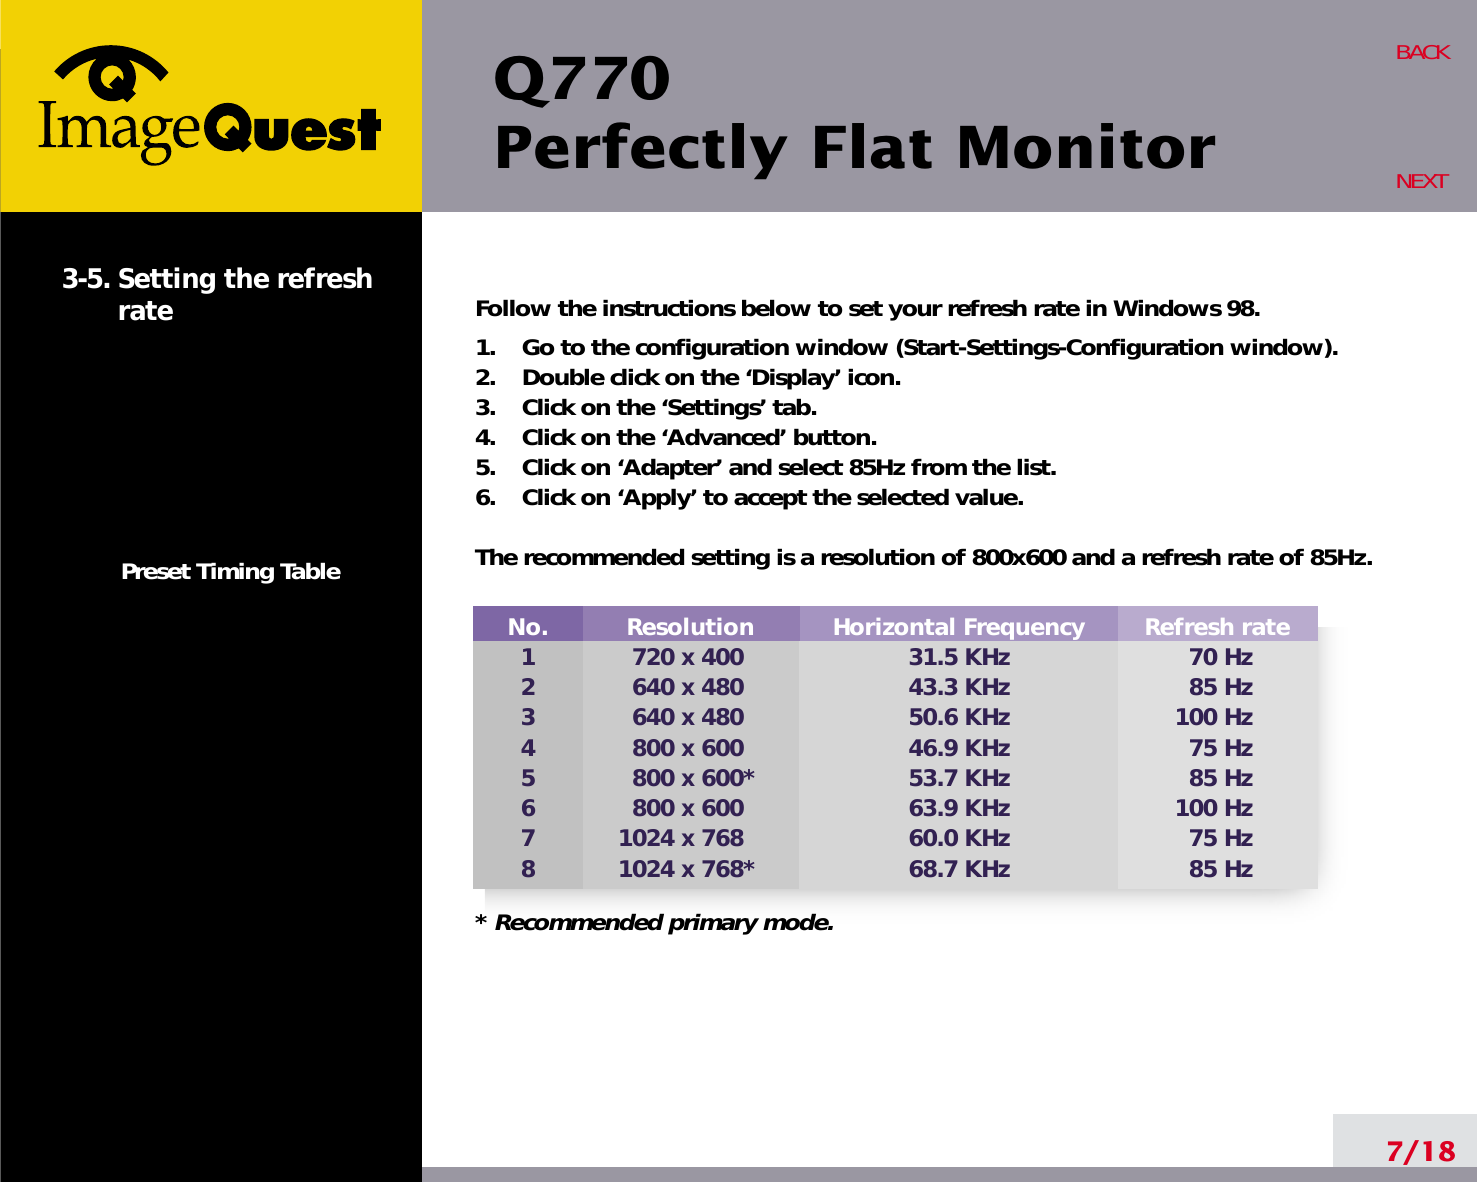 Q770Perfectly Flat Monitor7/18BACKNEXT3-5. Setting the refreshratePreset Timing TableFollow the instructions below to set your refresh rate in Windows 98.1.    Go to the configuration window (Start-Settings-Configuration window).2.    Double click on the ‘Display’ icon.3.    Click on the ‘Settings’ tab.4.    Click on the ‘Advanced’ button.5.    Click on ‘Adapter’ and select 85Hz from the list.6.    Click on ‘Apply’ to accept the selected value.The recommended setting is a resolution of 800x600 and a refresh rate of 85Hz.No.12345678Resolution720 x 400640 x 480640 x 480800 x 600800 x 600*800 x 6001024 x 7681024 x 768*Refresh rate70 Hz85 Hz100 Hz75 Hz85 Hz100 Hz75 Hz85 HzHorizontal Frequency31.5 KHz43.3 KHz50.6 KHz46.9 KHz53.7 KHz63.9 KHz60.0 KHz68.7 KHz* Recommended primary mode.